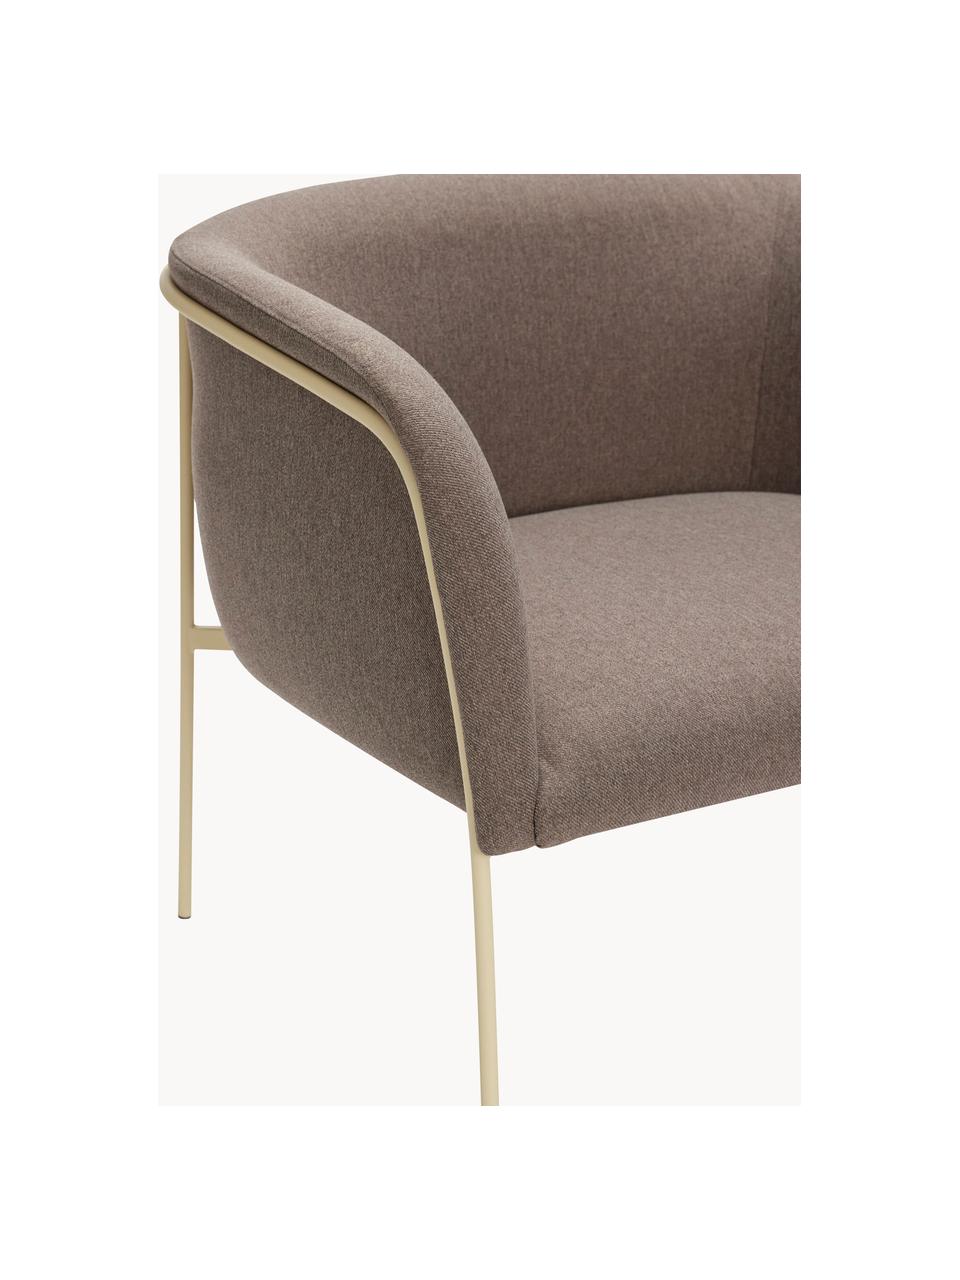 Loungefauteuil Eyrie, Bekleding: 100% polyester Met 40.000, Frame: gecoat staal, Geweven stof taupe, lichtbeige, B 89 x D 58 cm